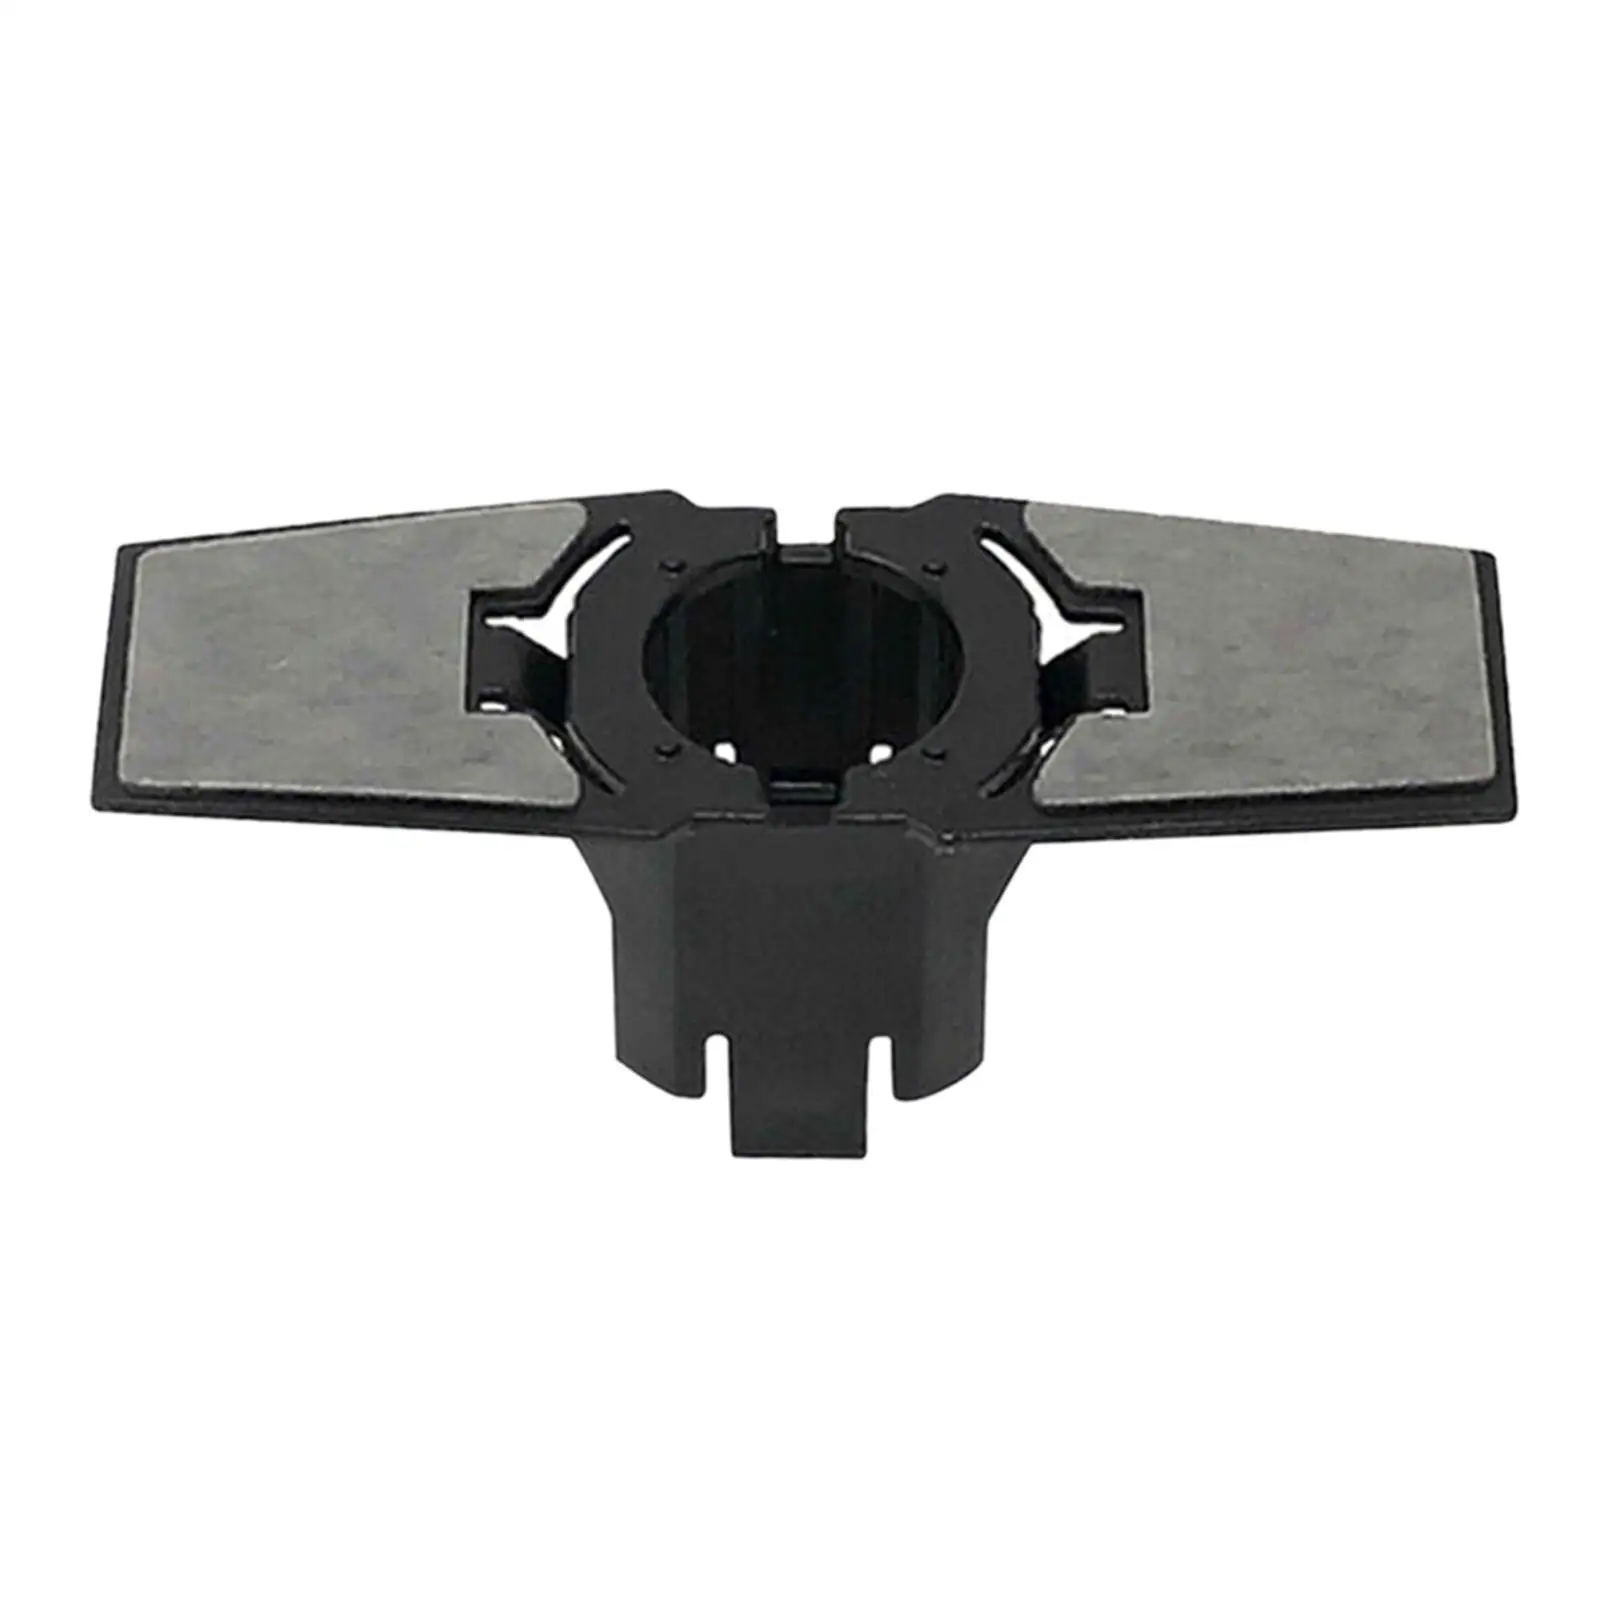 2x Parking Bracket cover Replaces Accessory, High Performance Black for 285335ZA0A Q70